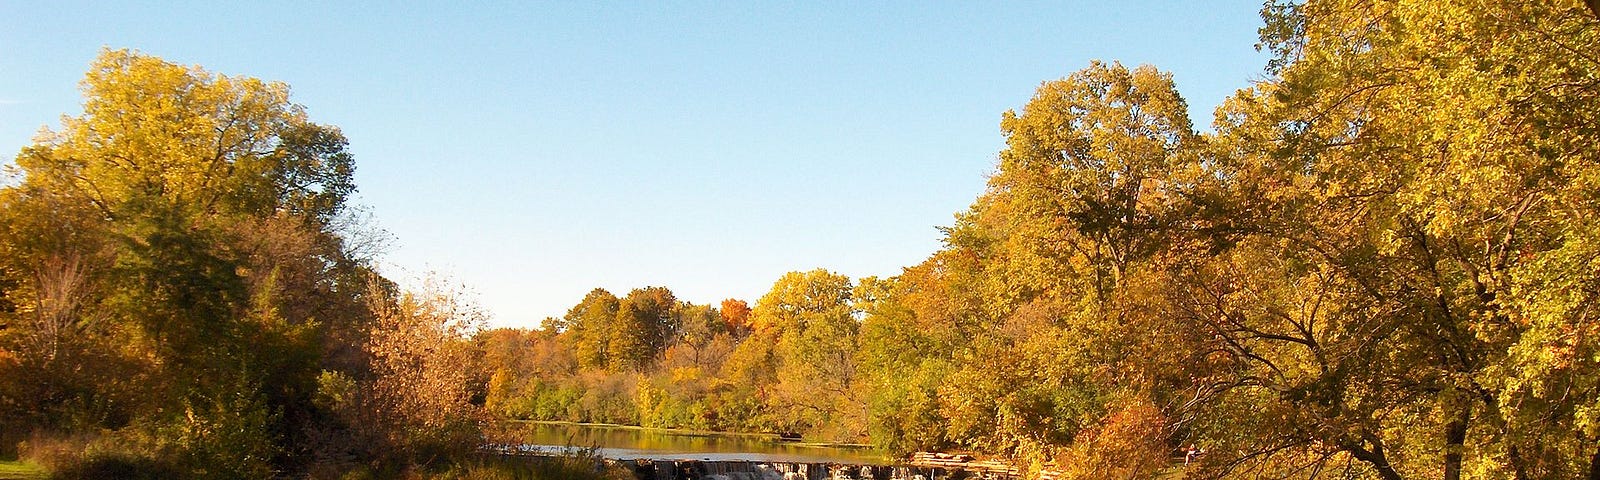 The DuPage River in Illinois  surrounded by orange-leaved trees.